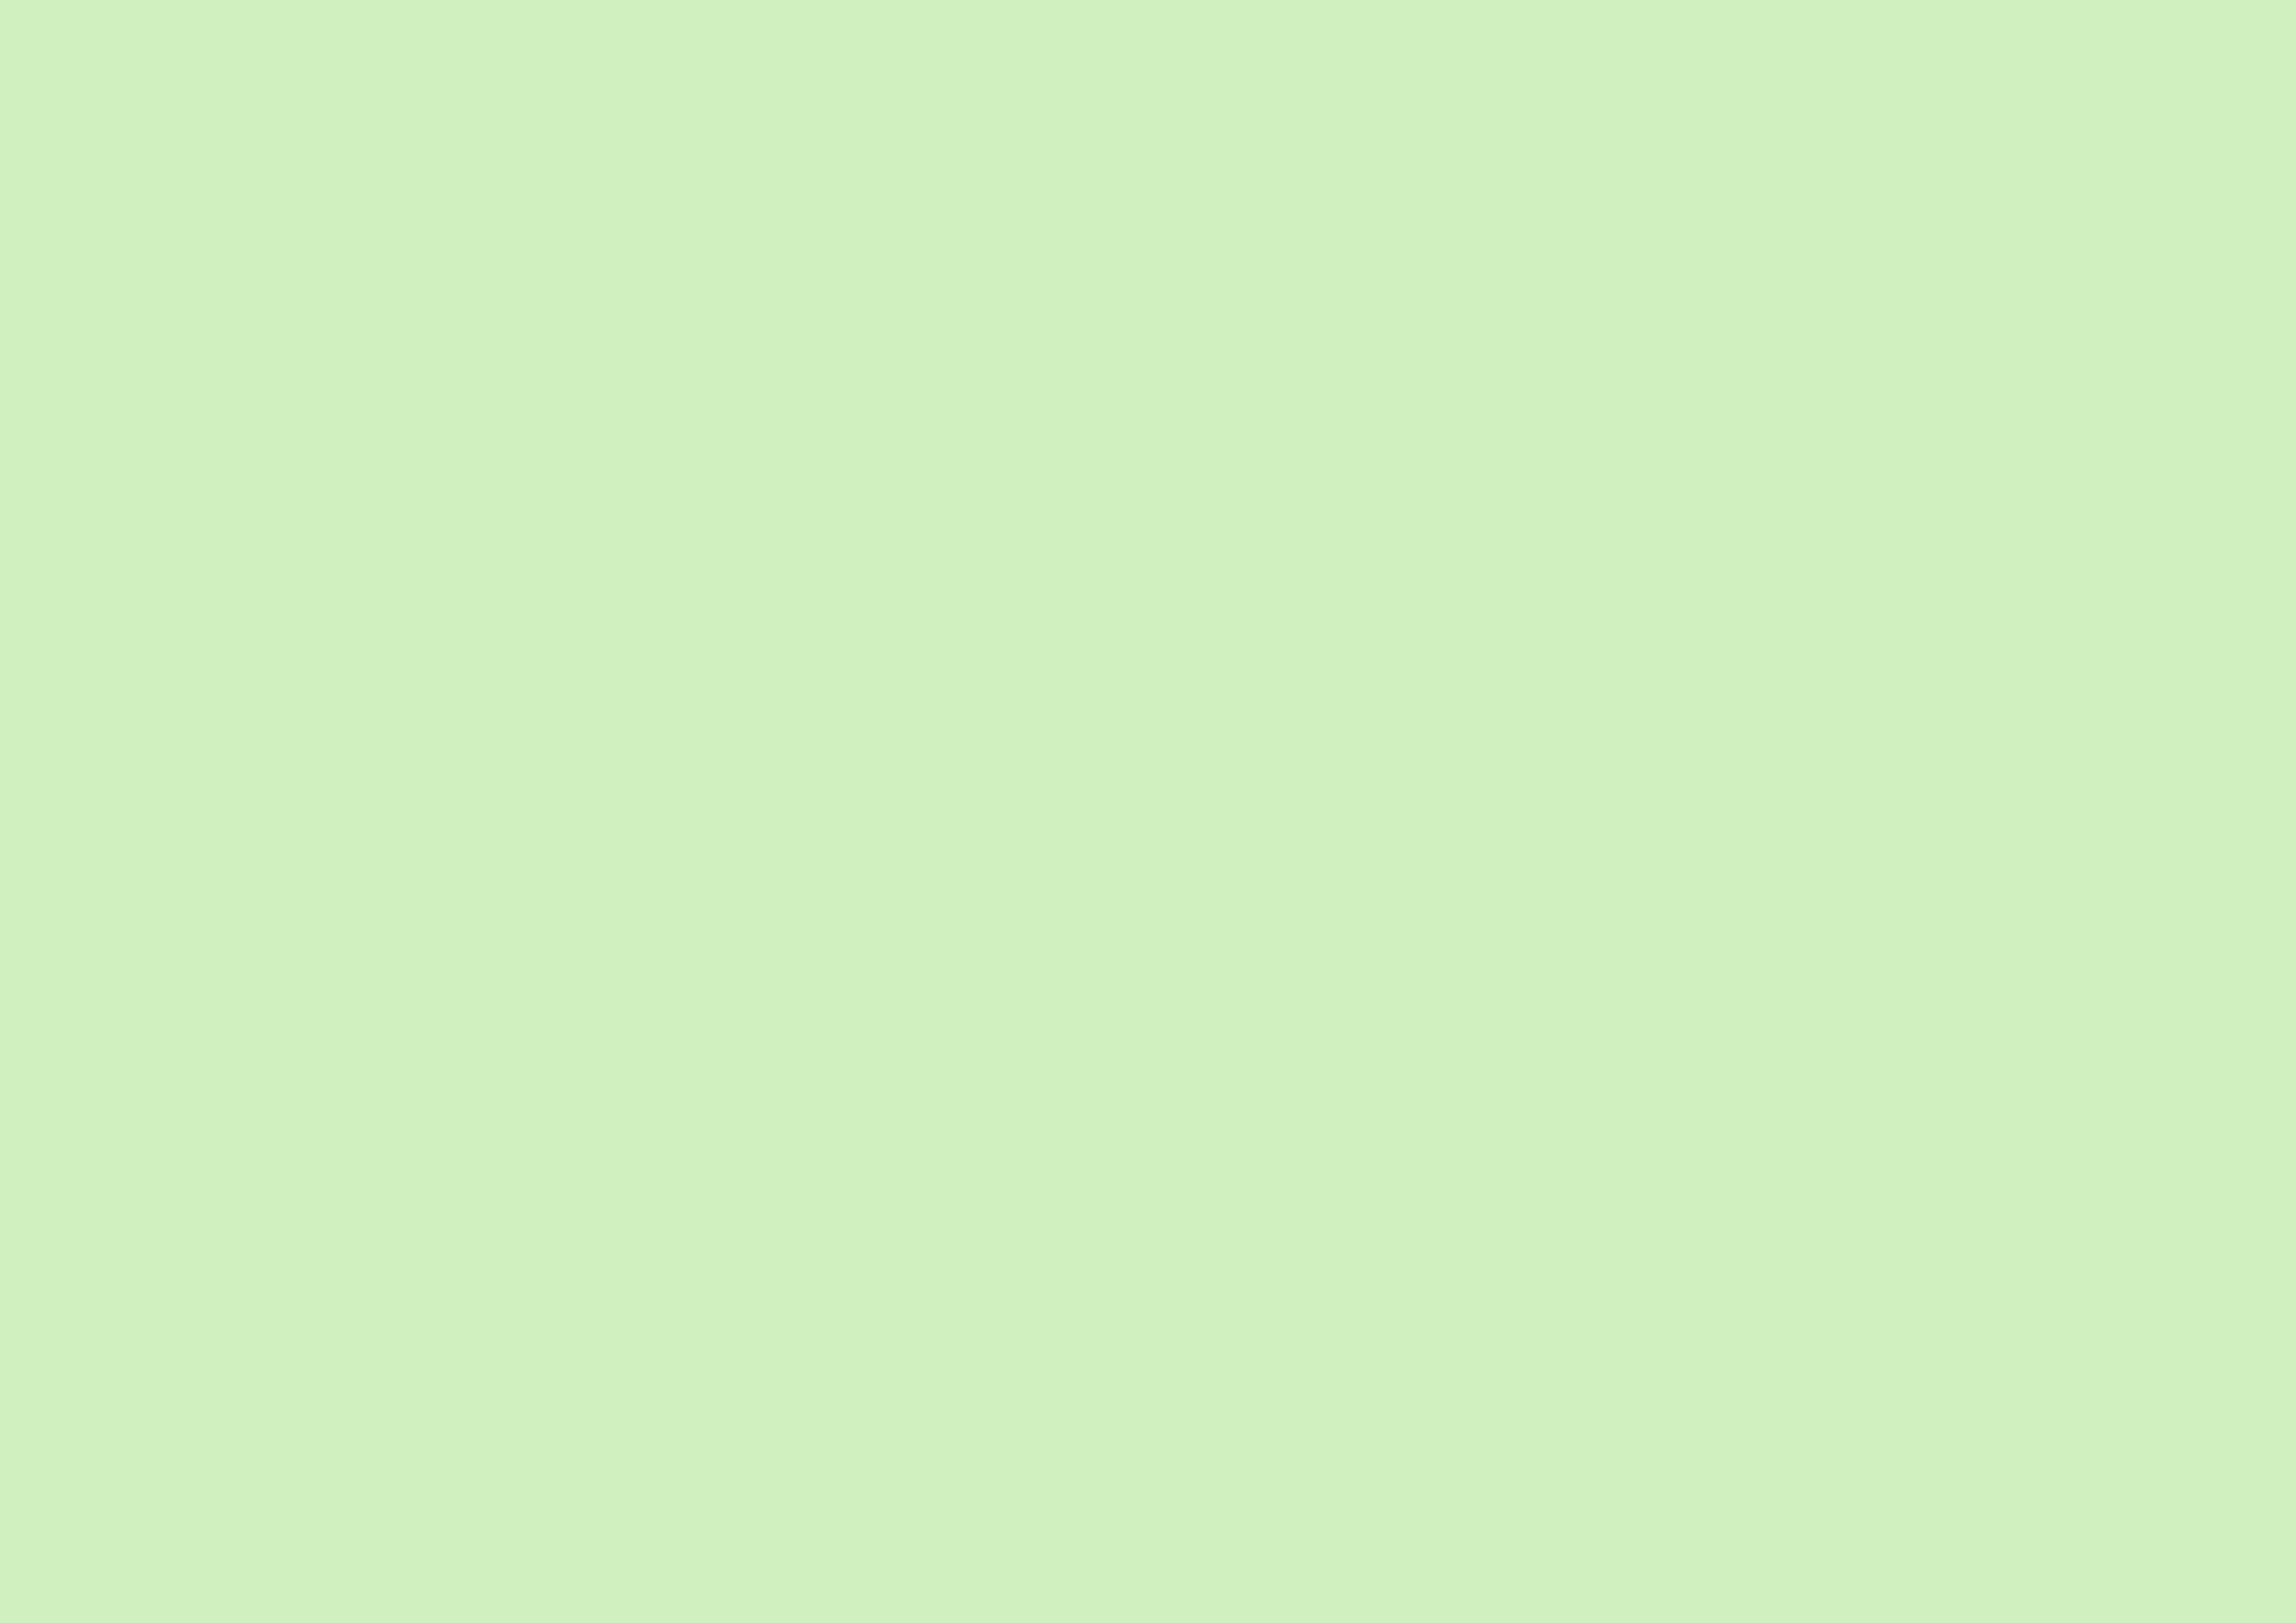 3508x2480 Tea Green Solid Color Background